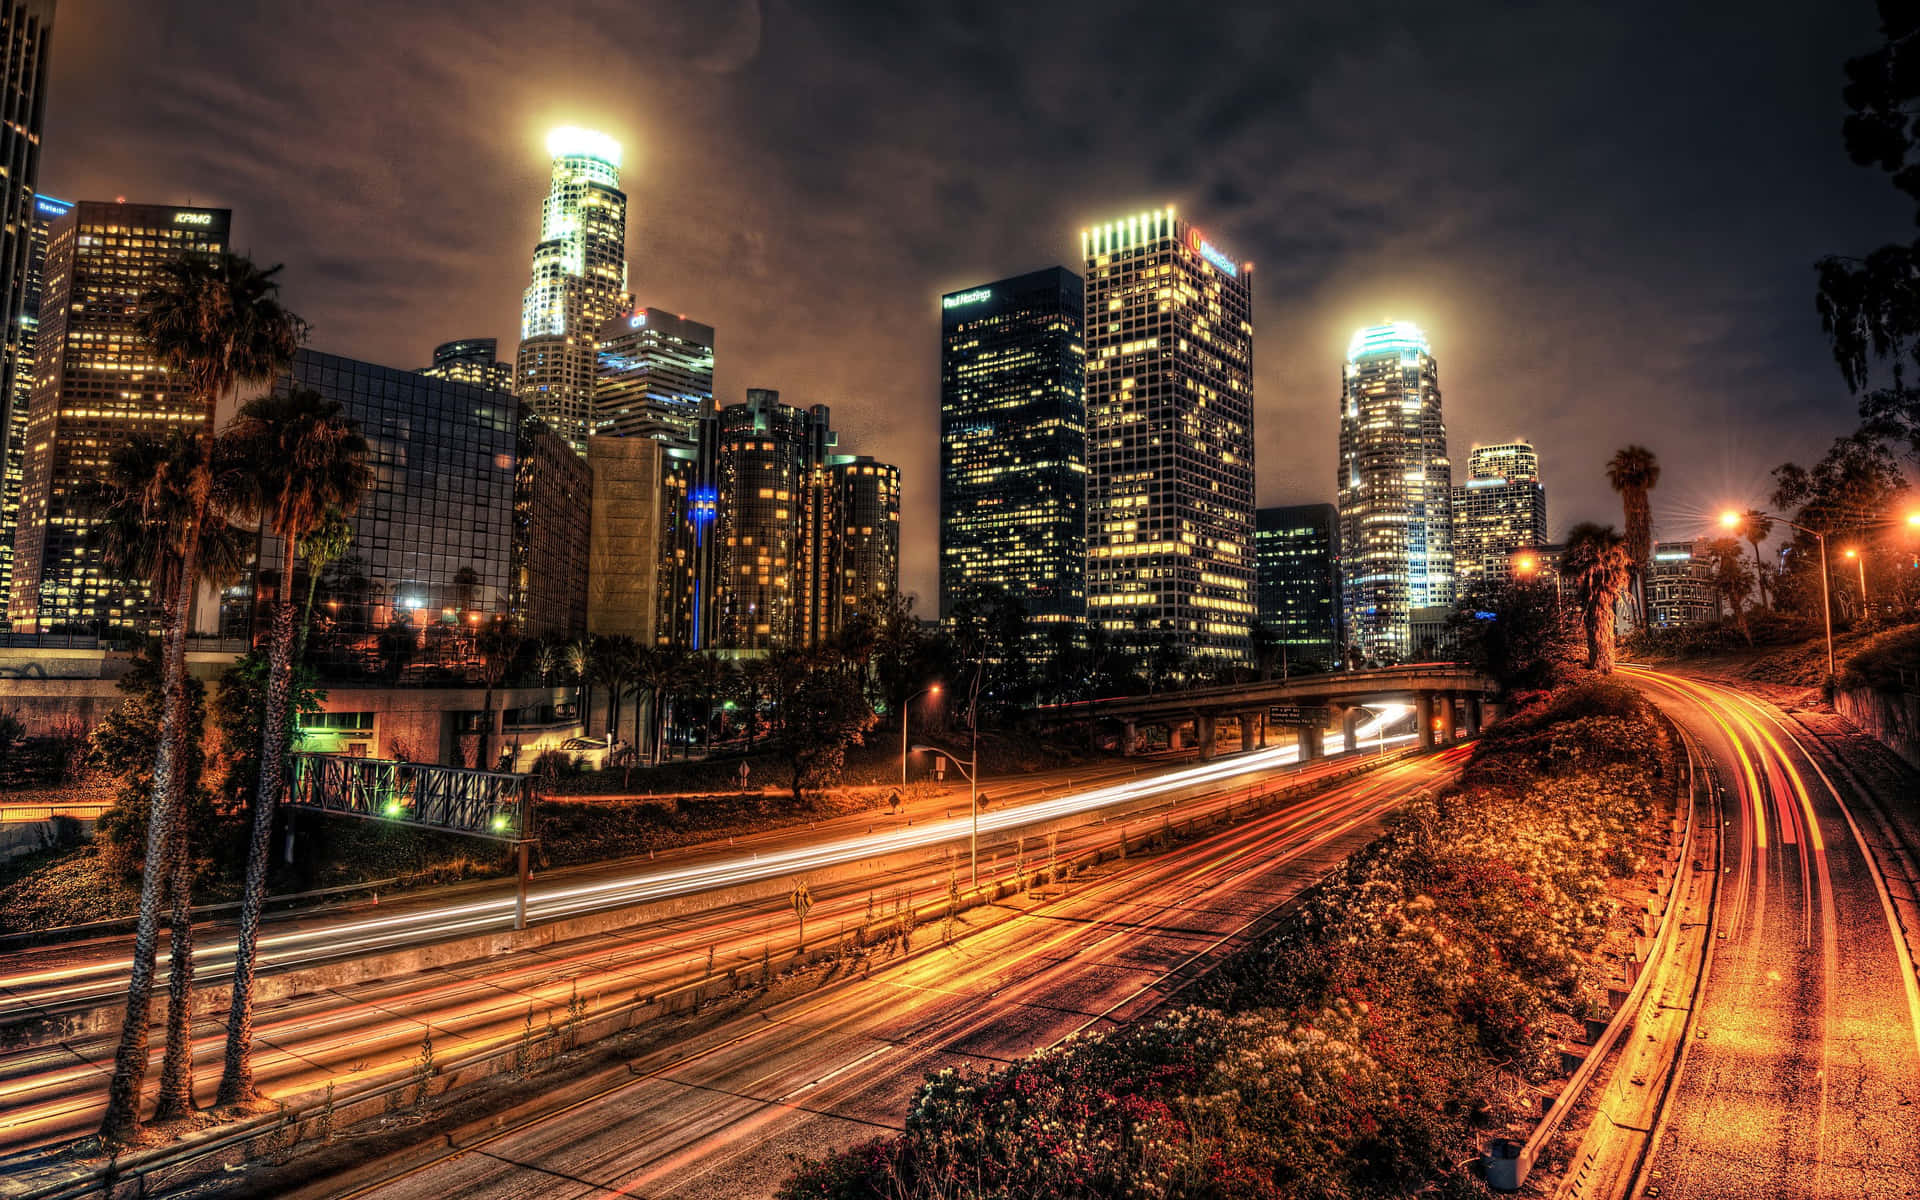 A mesmerizing view of the Los Angeles skyline at night with illuminated buildings and streets